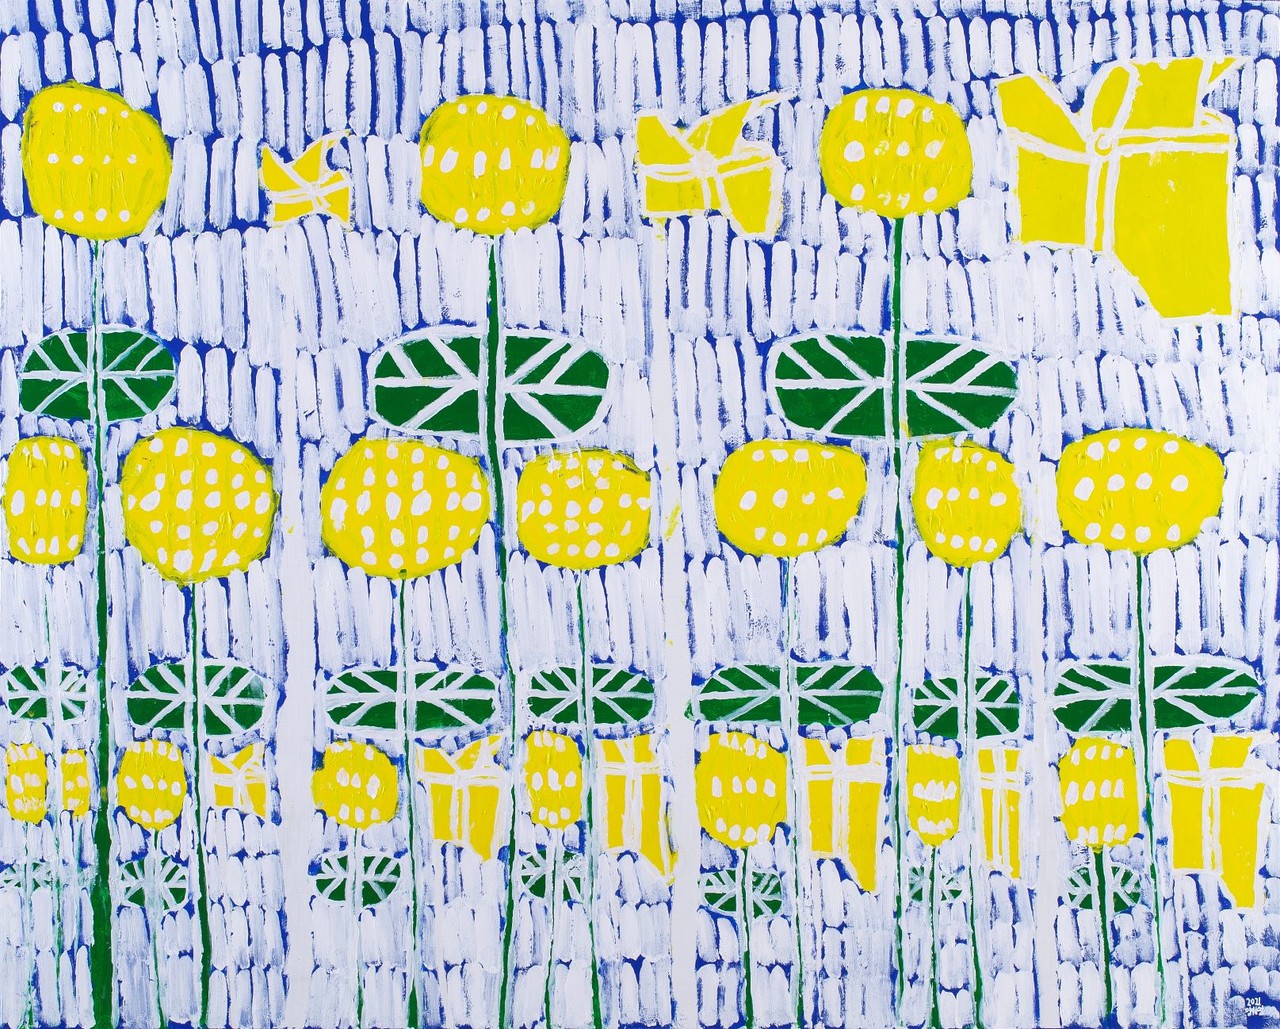 Yang Si Yeong  바람개비 유채꽃(rape blossoms with windmill) , 2021  Acrylic on canvas  162.0 x 130.3 cm  SY 008